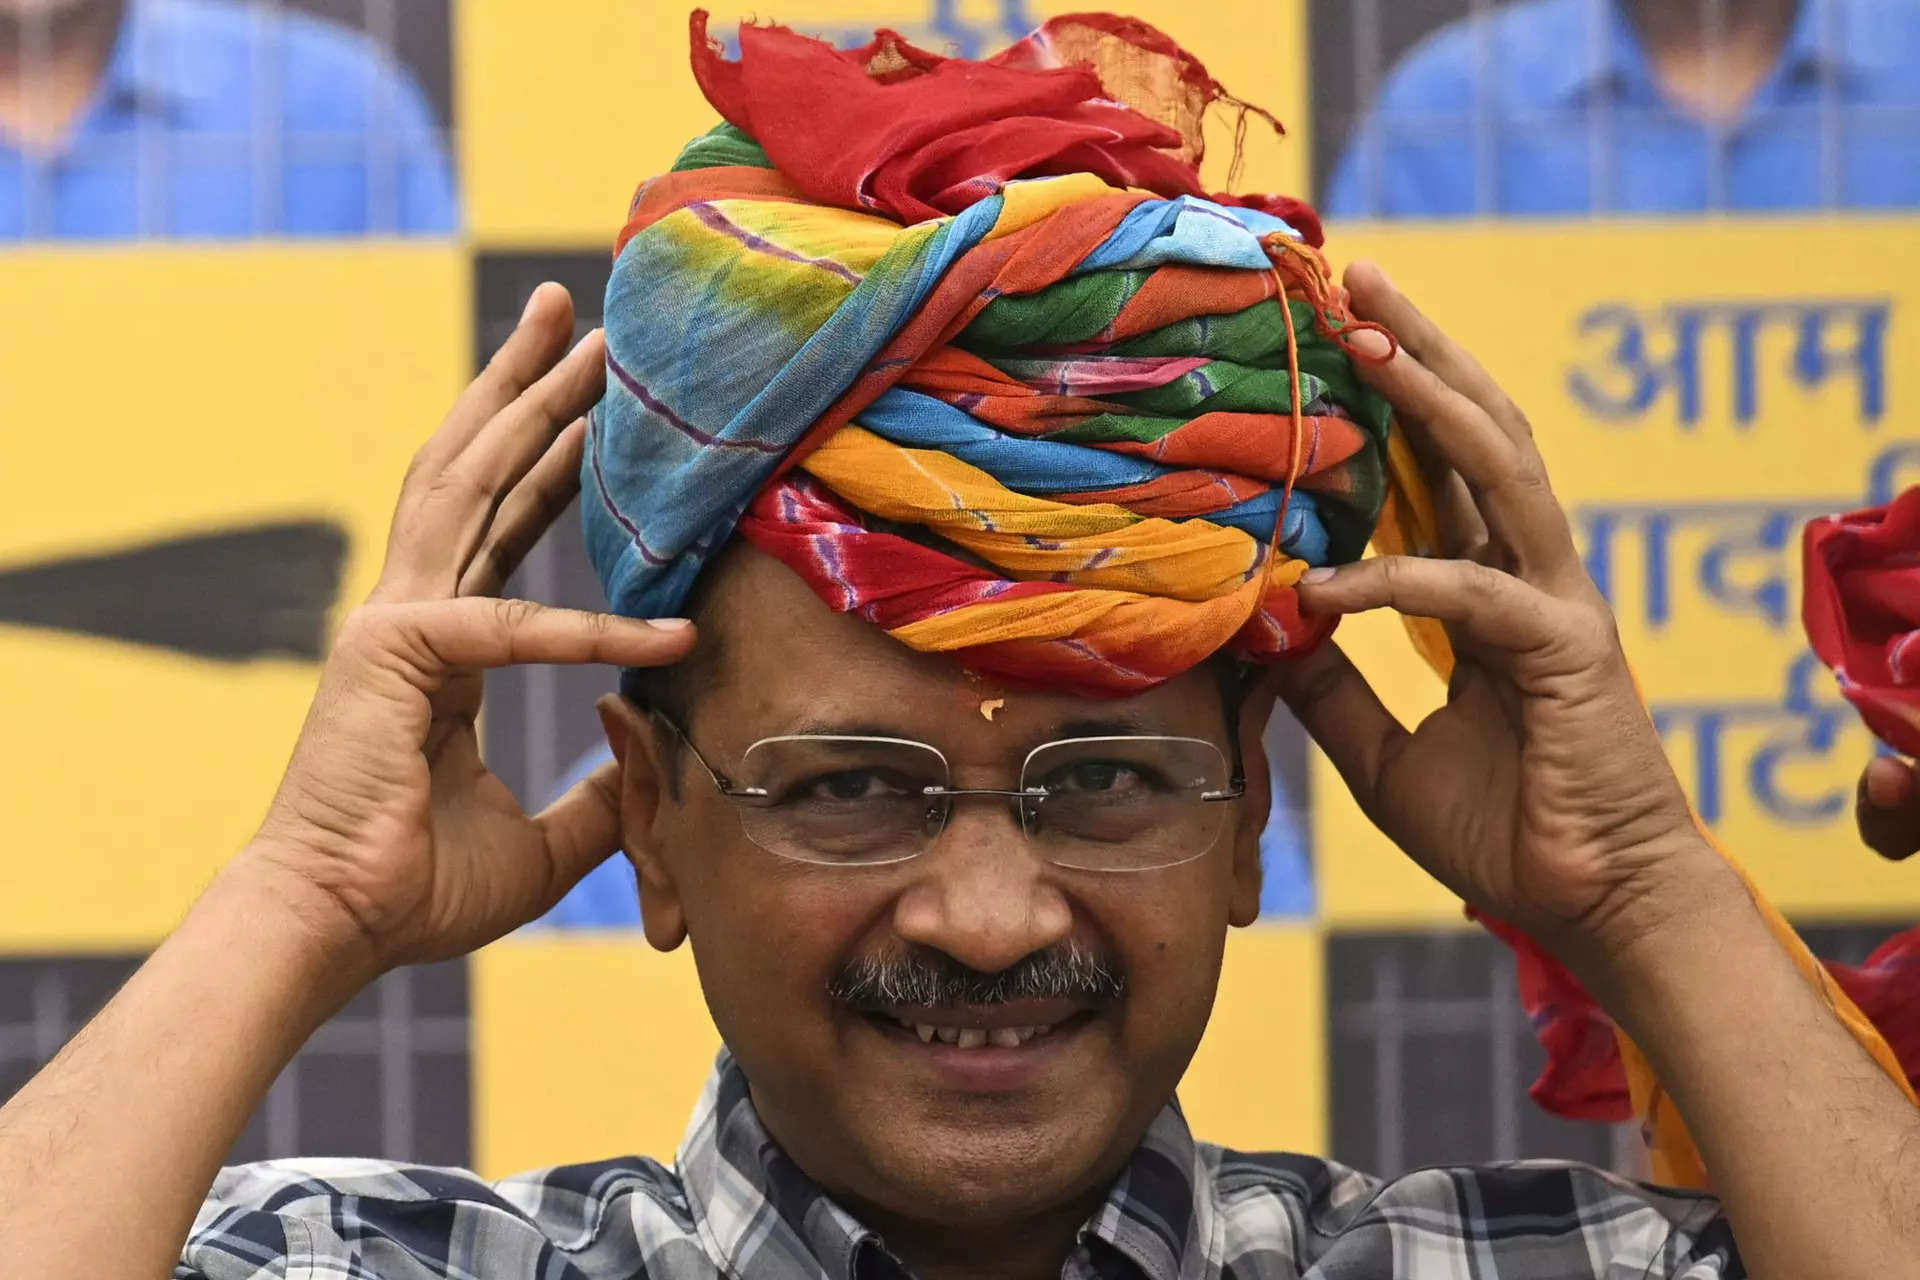 Delhi CM Arvind Kejriwal to meet with AAP MLAs today, first after exit from jail 